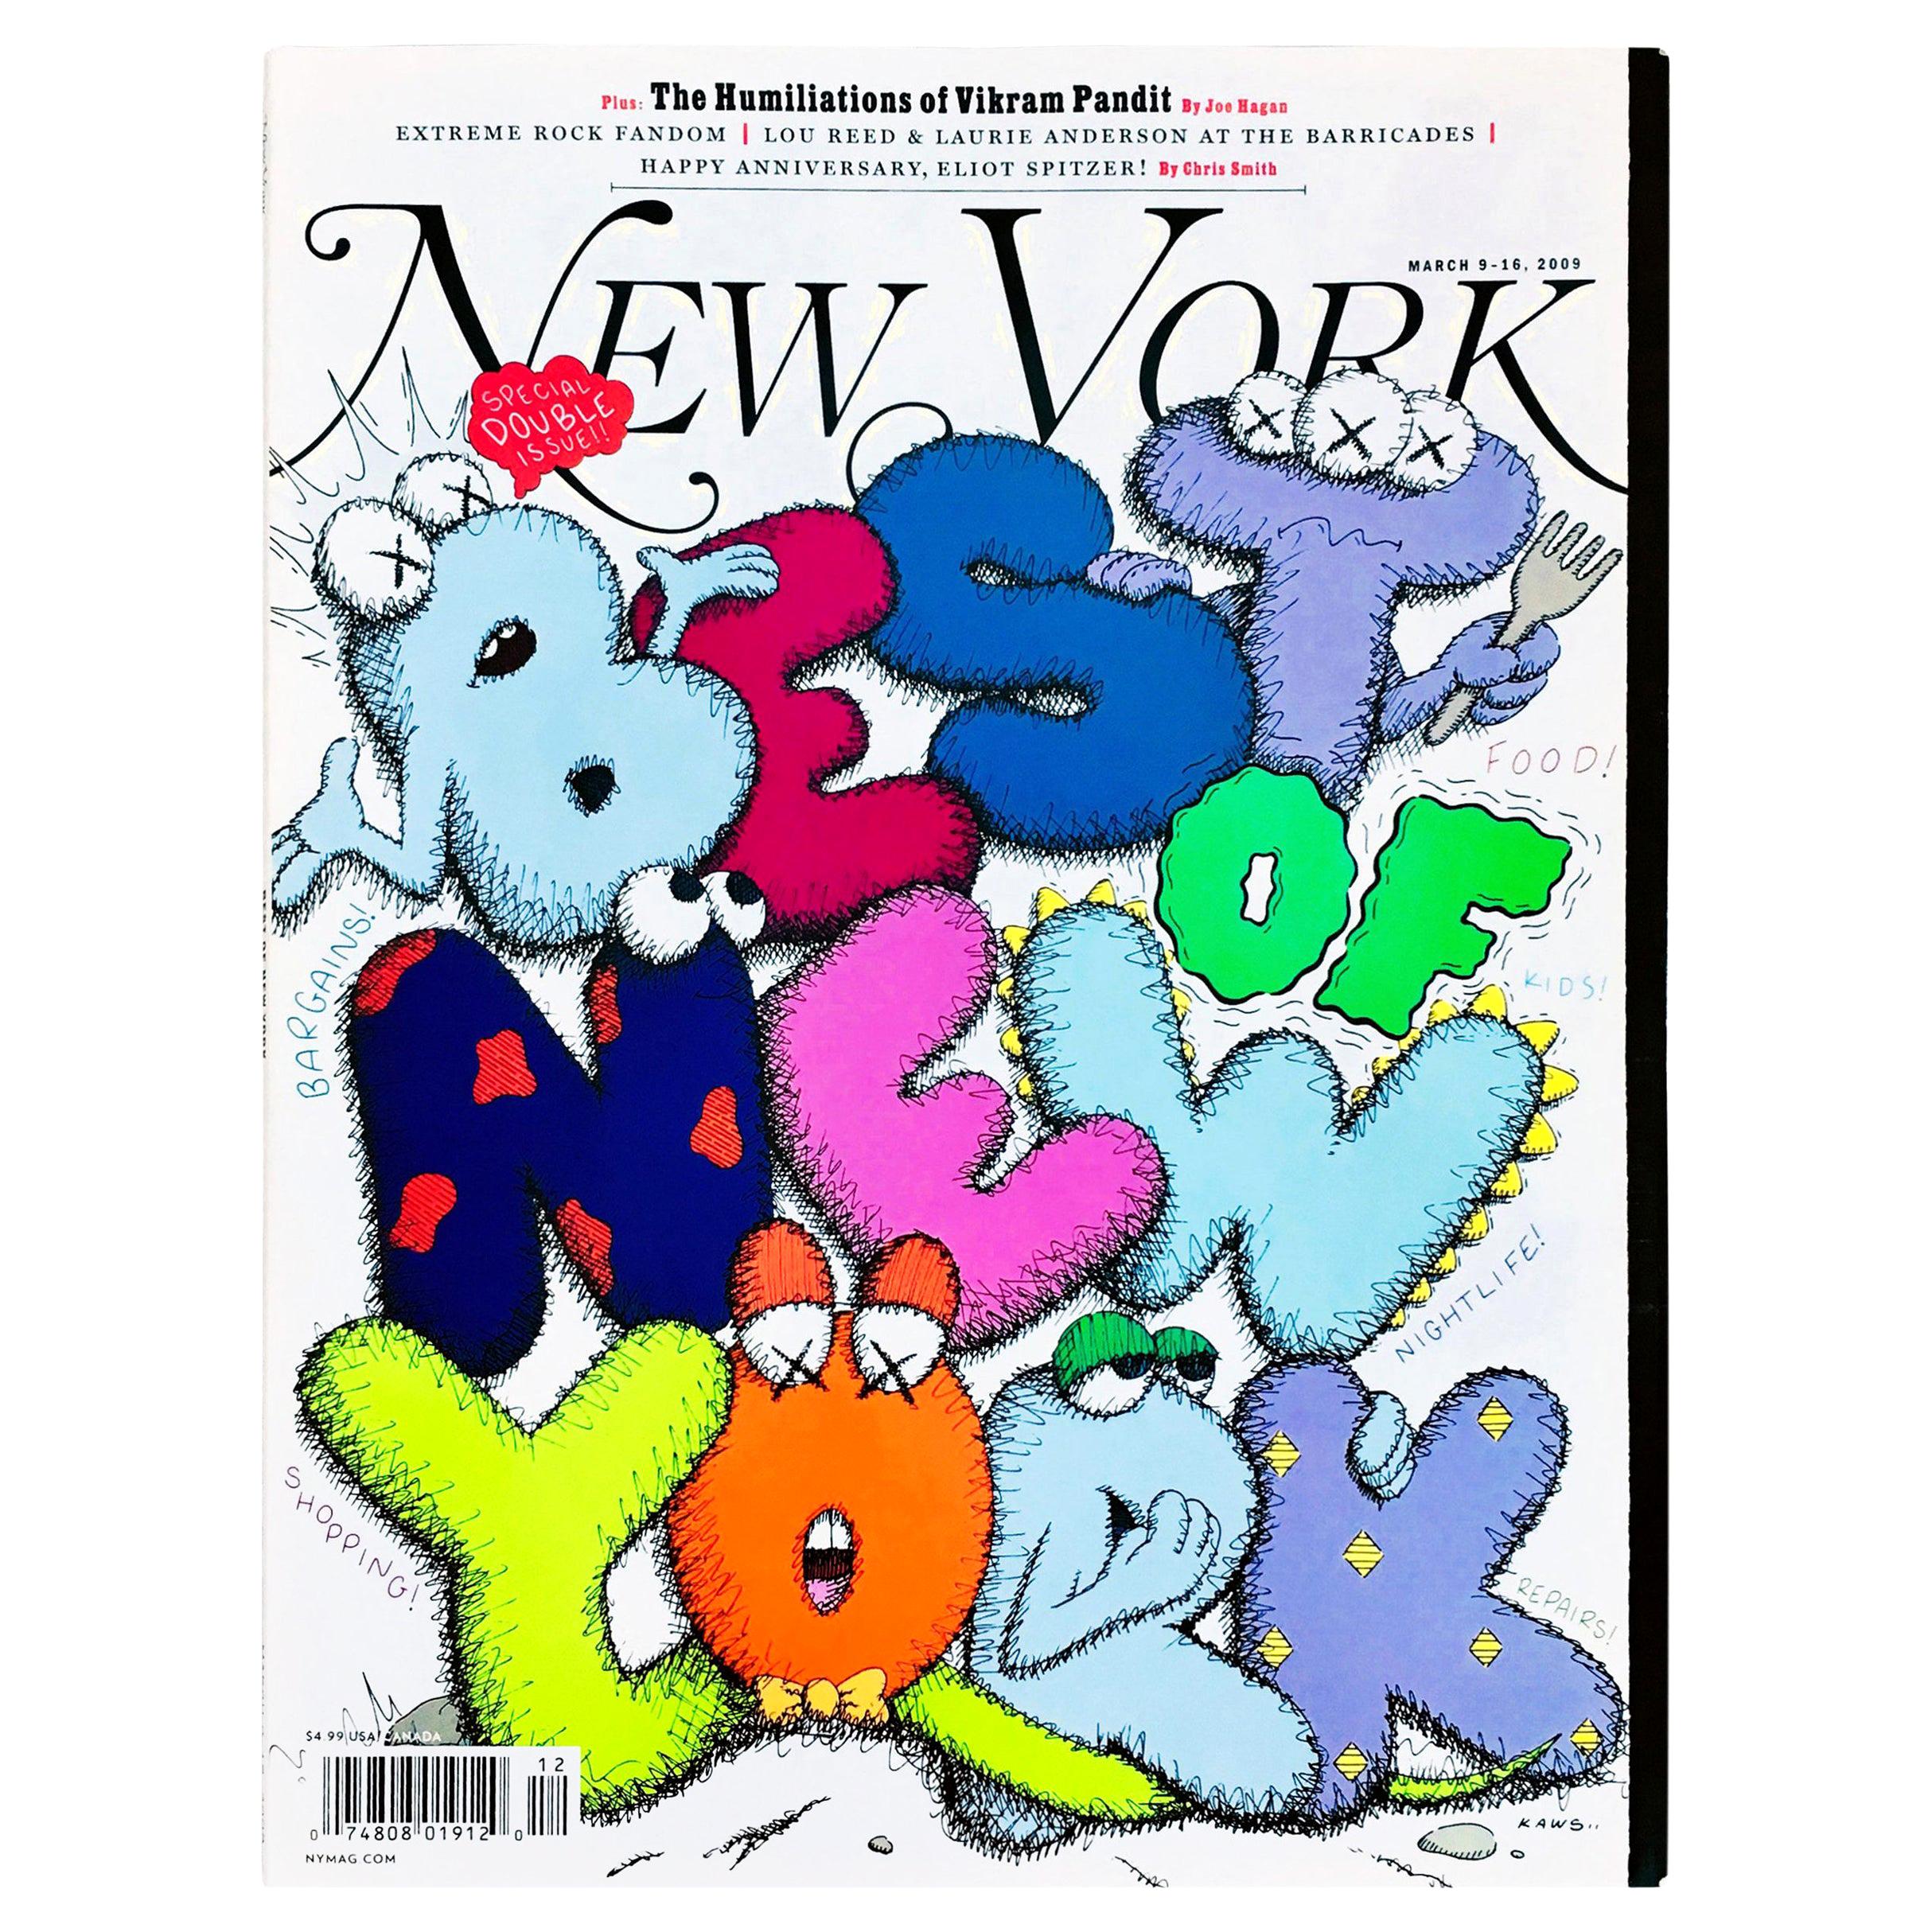 After previously working on the covers of ID magazine and complex, Kaws did the cover art for New York Magazine’s “Best Of New York 2009” issue.

Approximately measures: 9 x 12 inches, minor signs of handling; otherwise very good condition, full